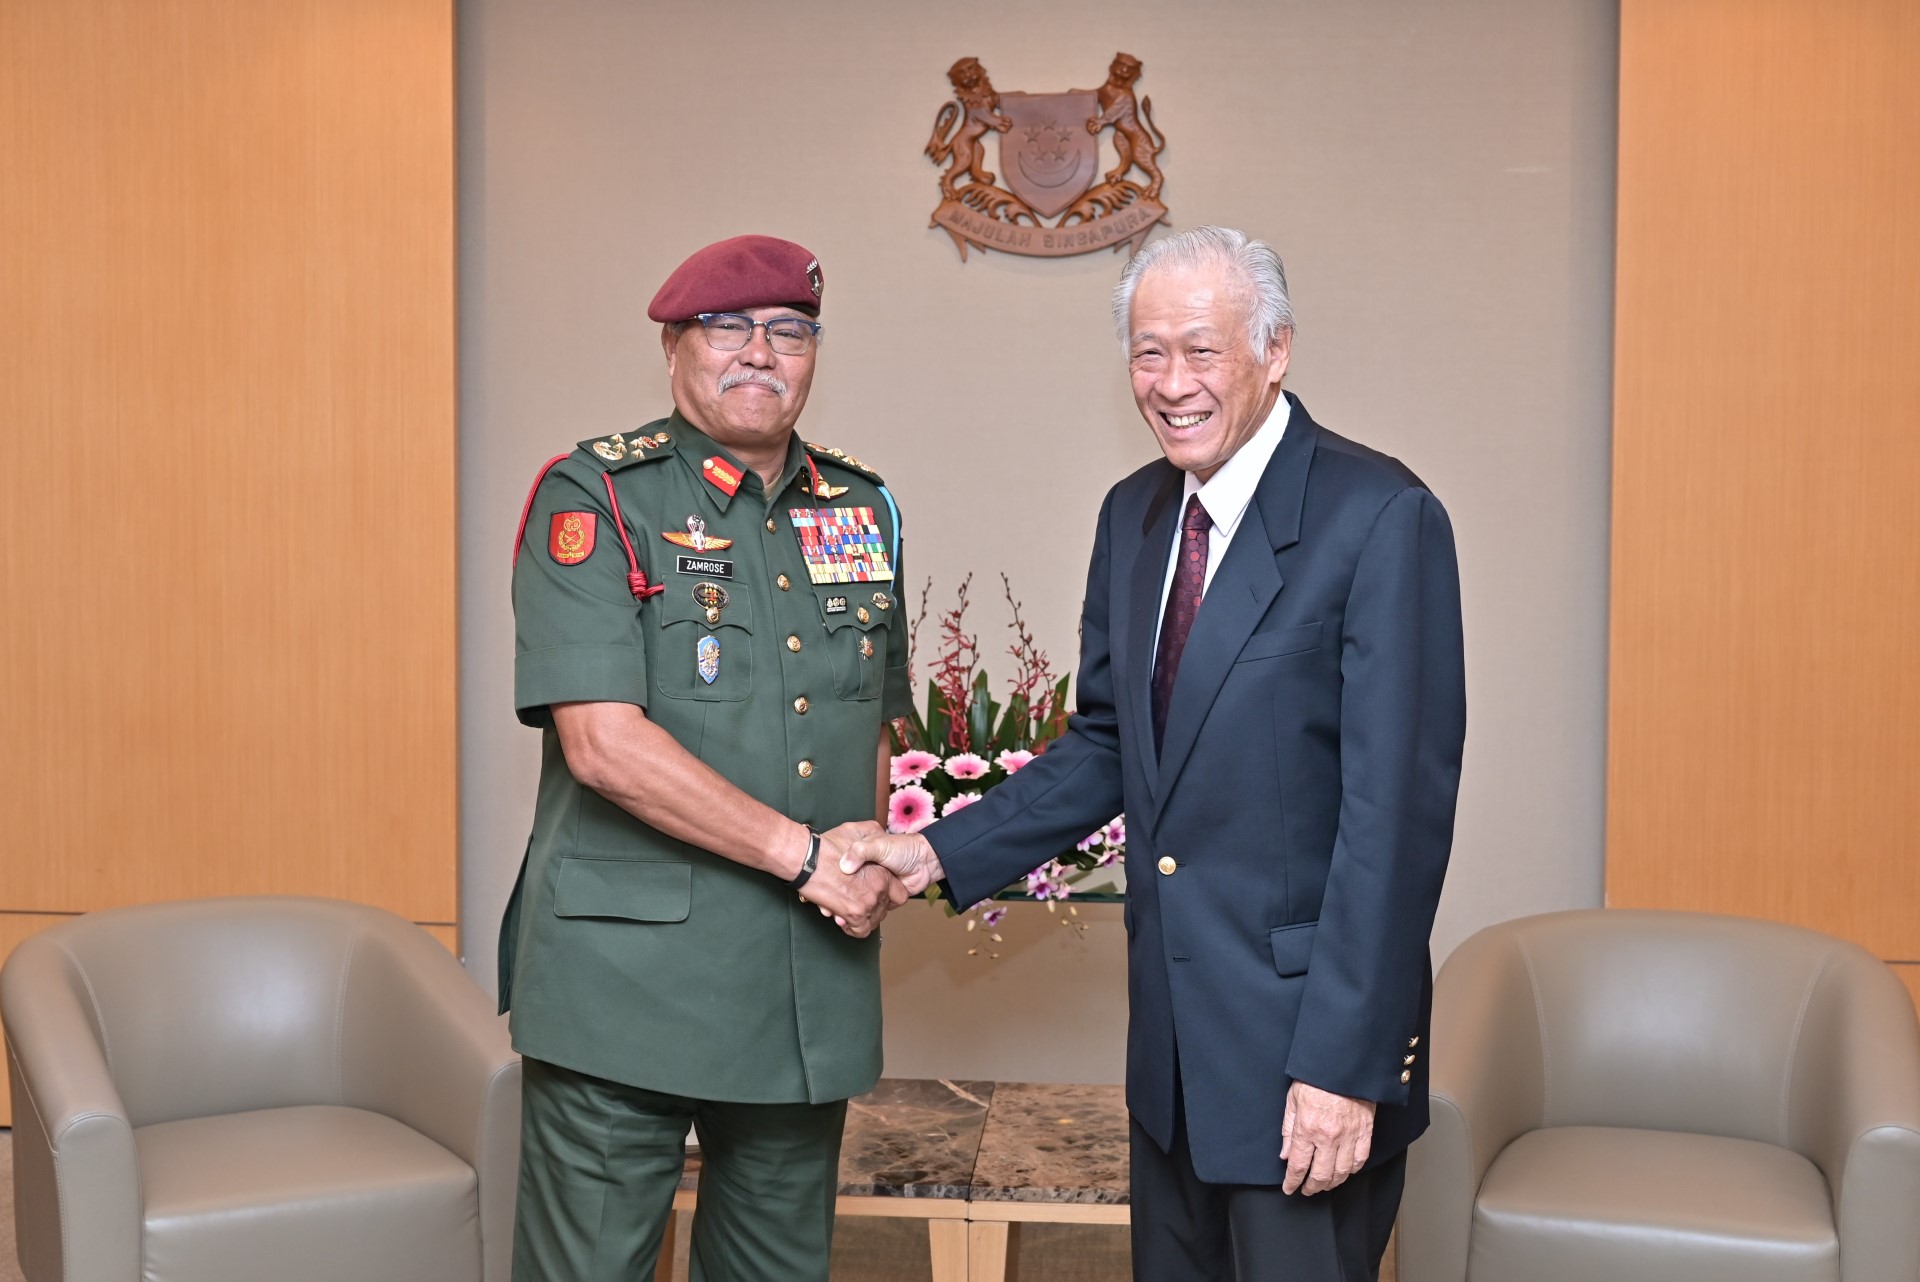 Malaysian Armed Forces Chief of Army, General (GEN) Tan Sri Dato’ Seri Zamrose bin Mohd Zain (left) calling on Minister for Defence Dr Ng Eng Hen (right).